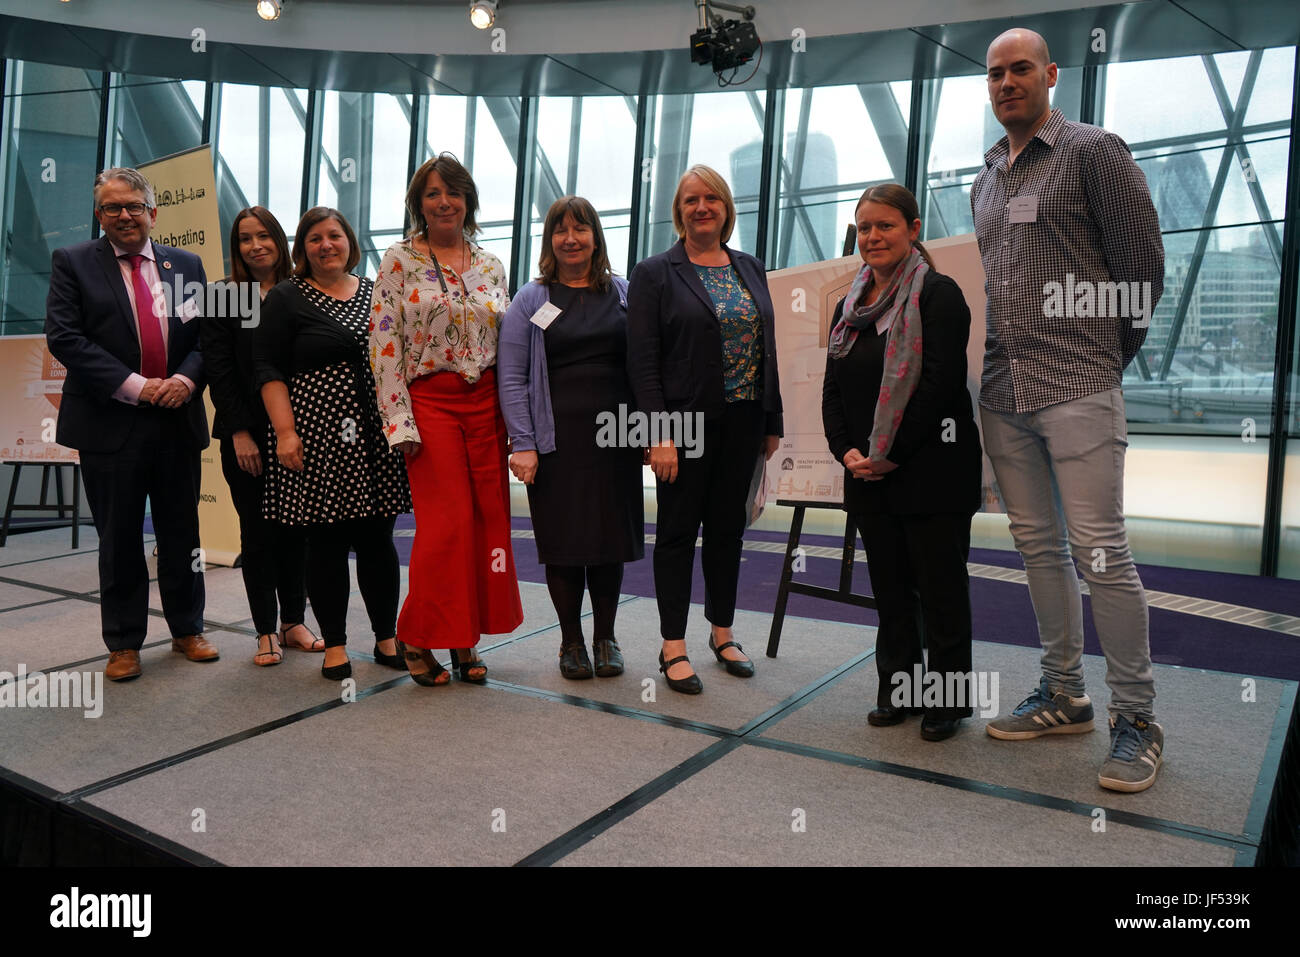 City Hall, London, Uk, 29th June 2017. Crownfield Infant School, Langtons Infant School, Glebe Primary, St Philip's, Links Primary School, All Saints Benhilton 'silver Awards' of the City Hall awards at the Health and education experts celebrate London’s healthiest schools. Credit: See Li/Alamy Live News Stock Photo